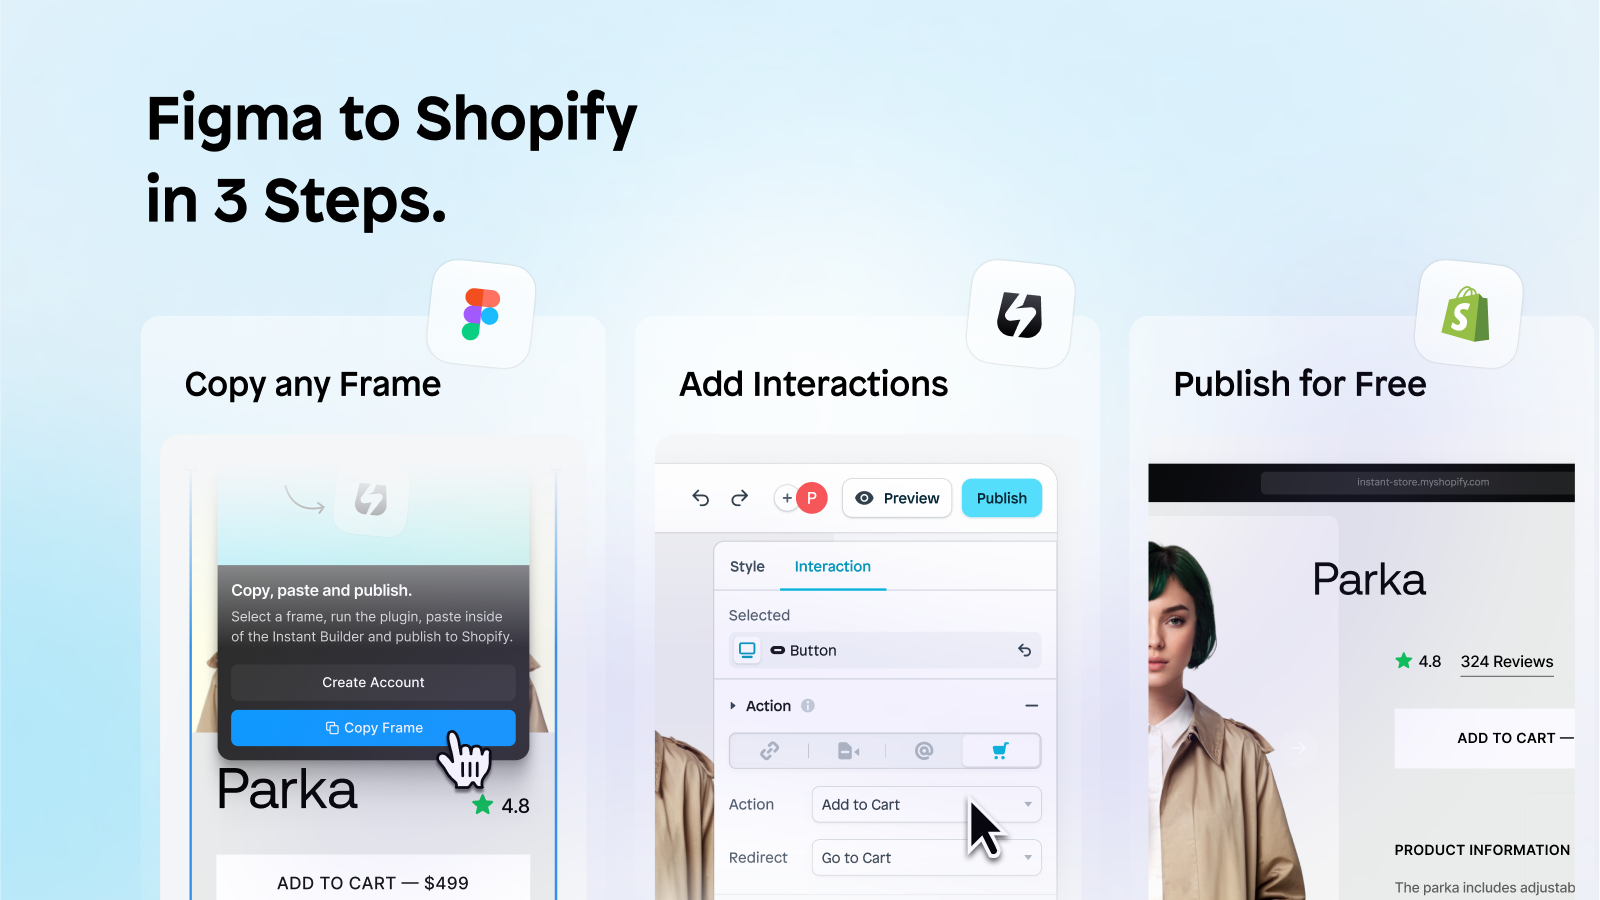 Figma to Shopify in 3 steps